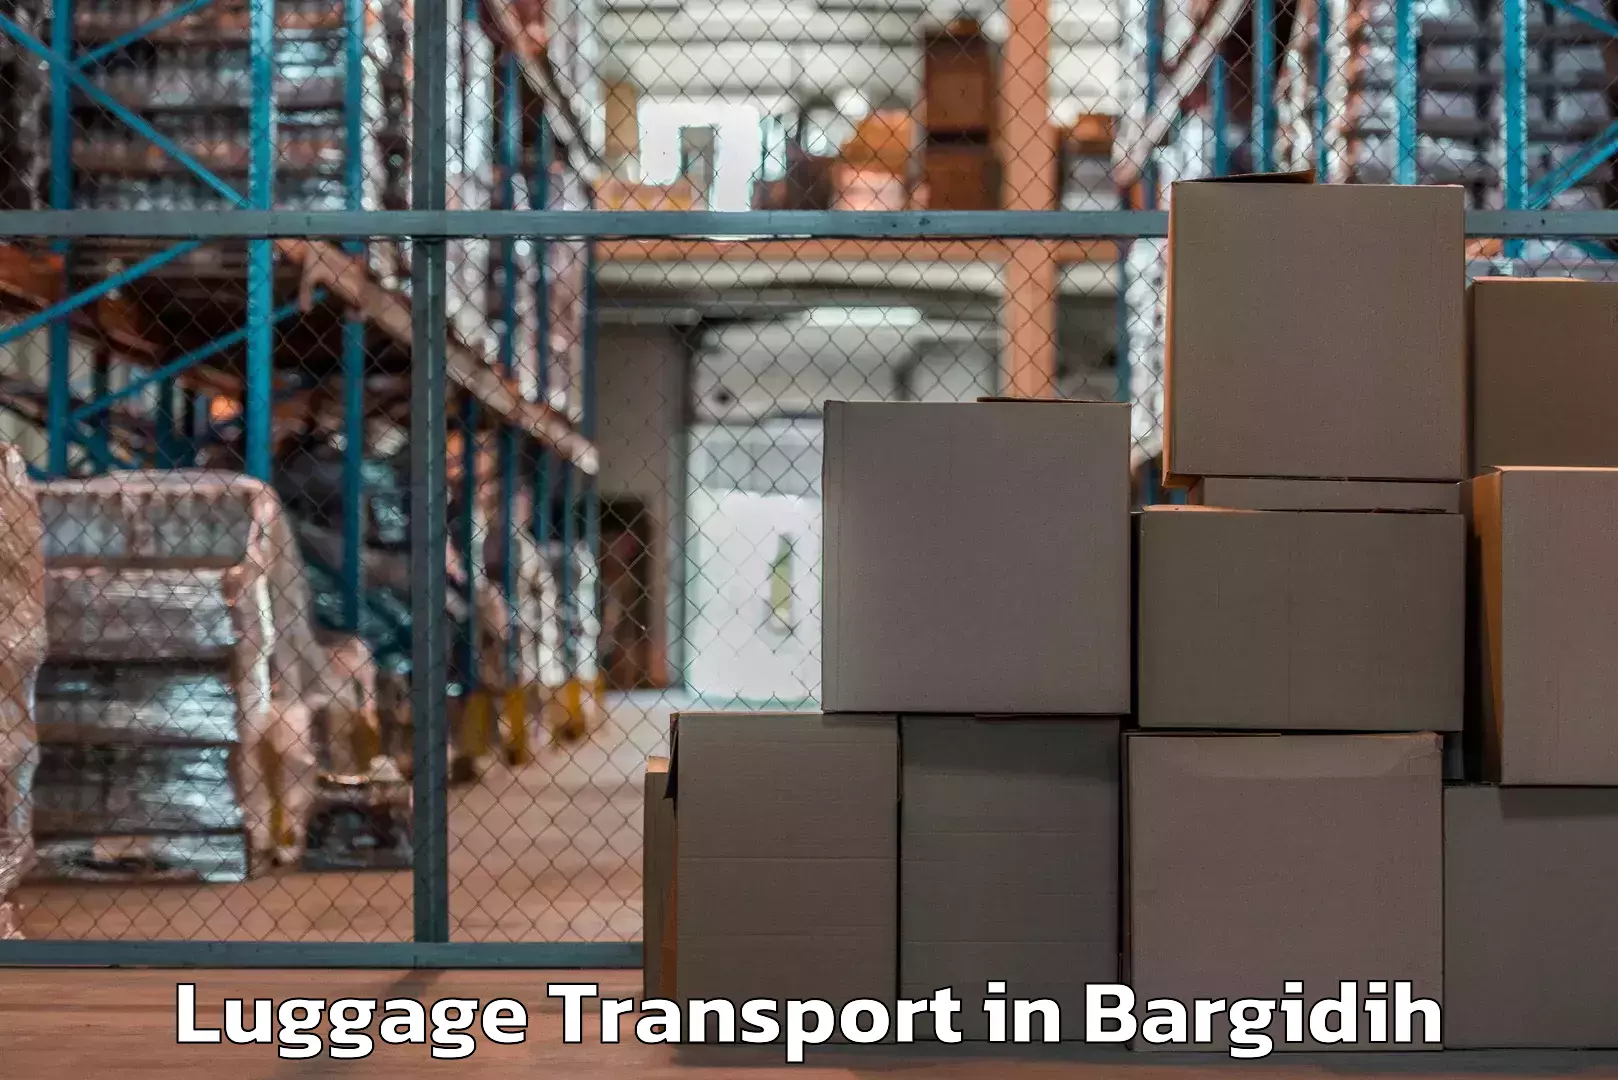 Luggage storage and delivery in Bargidih